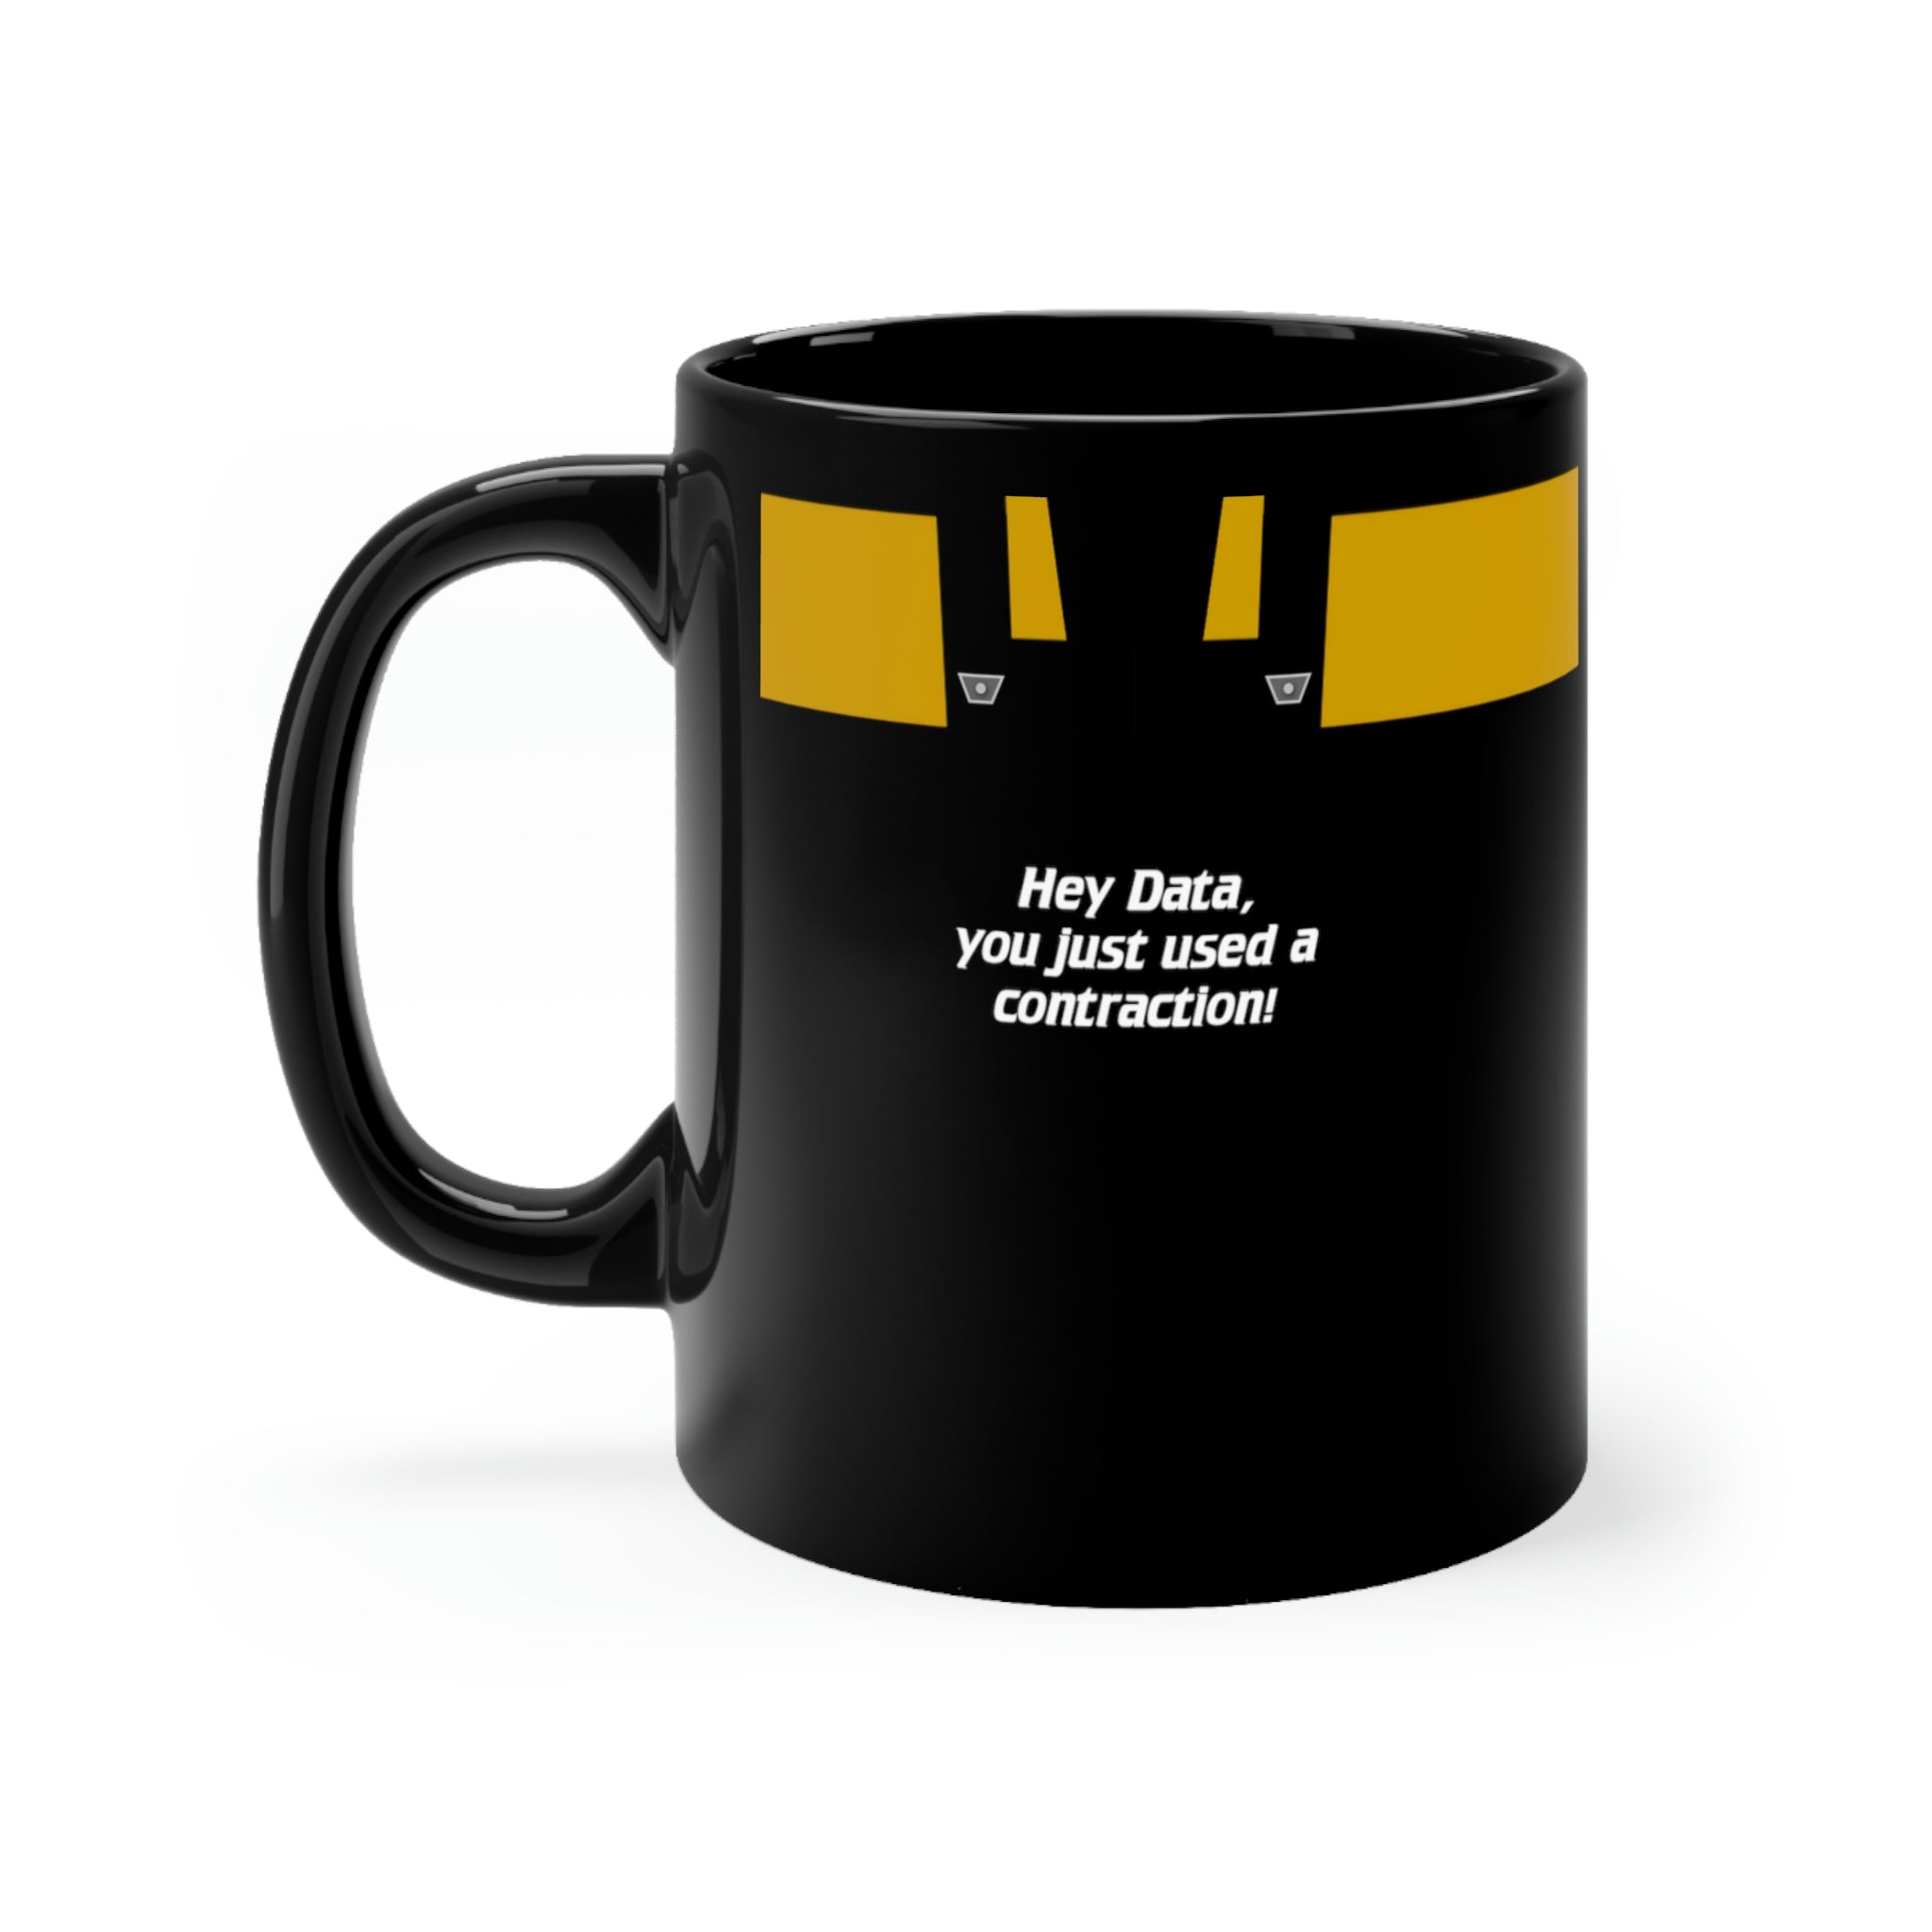 Hey Data, you just used a contraction! - Black 11oz mug